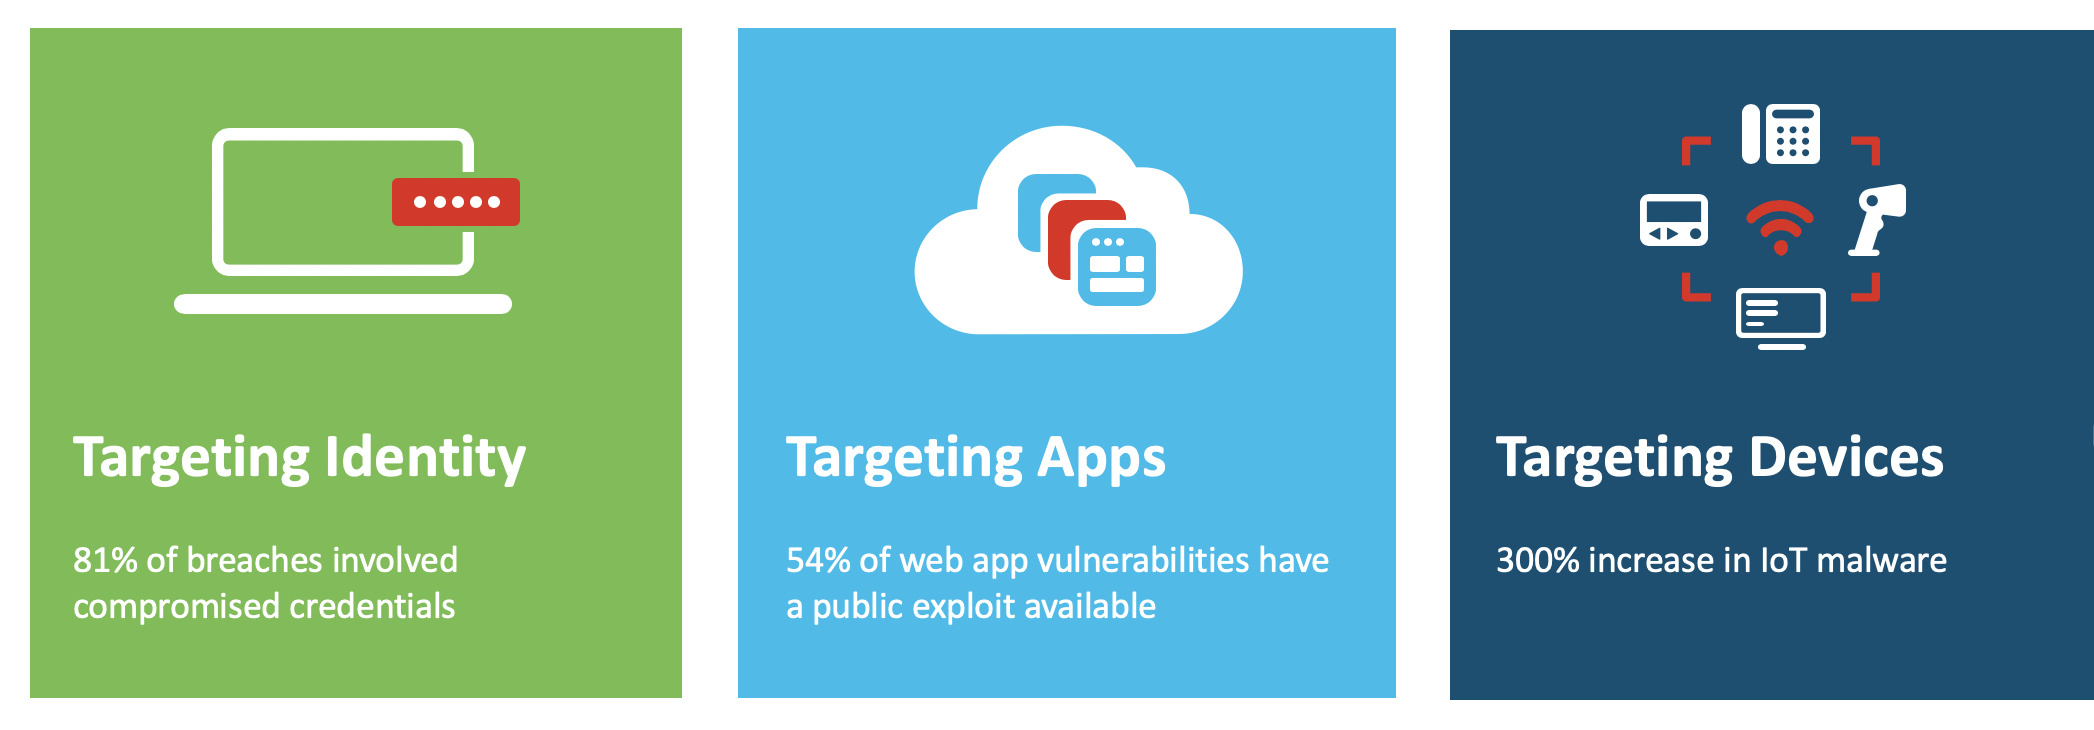 81% of breaches involved compromised credentials; 54% of app vulnerabilities have a public exploit; IoT malware is up 300%.